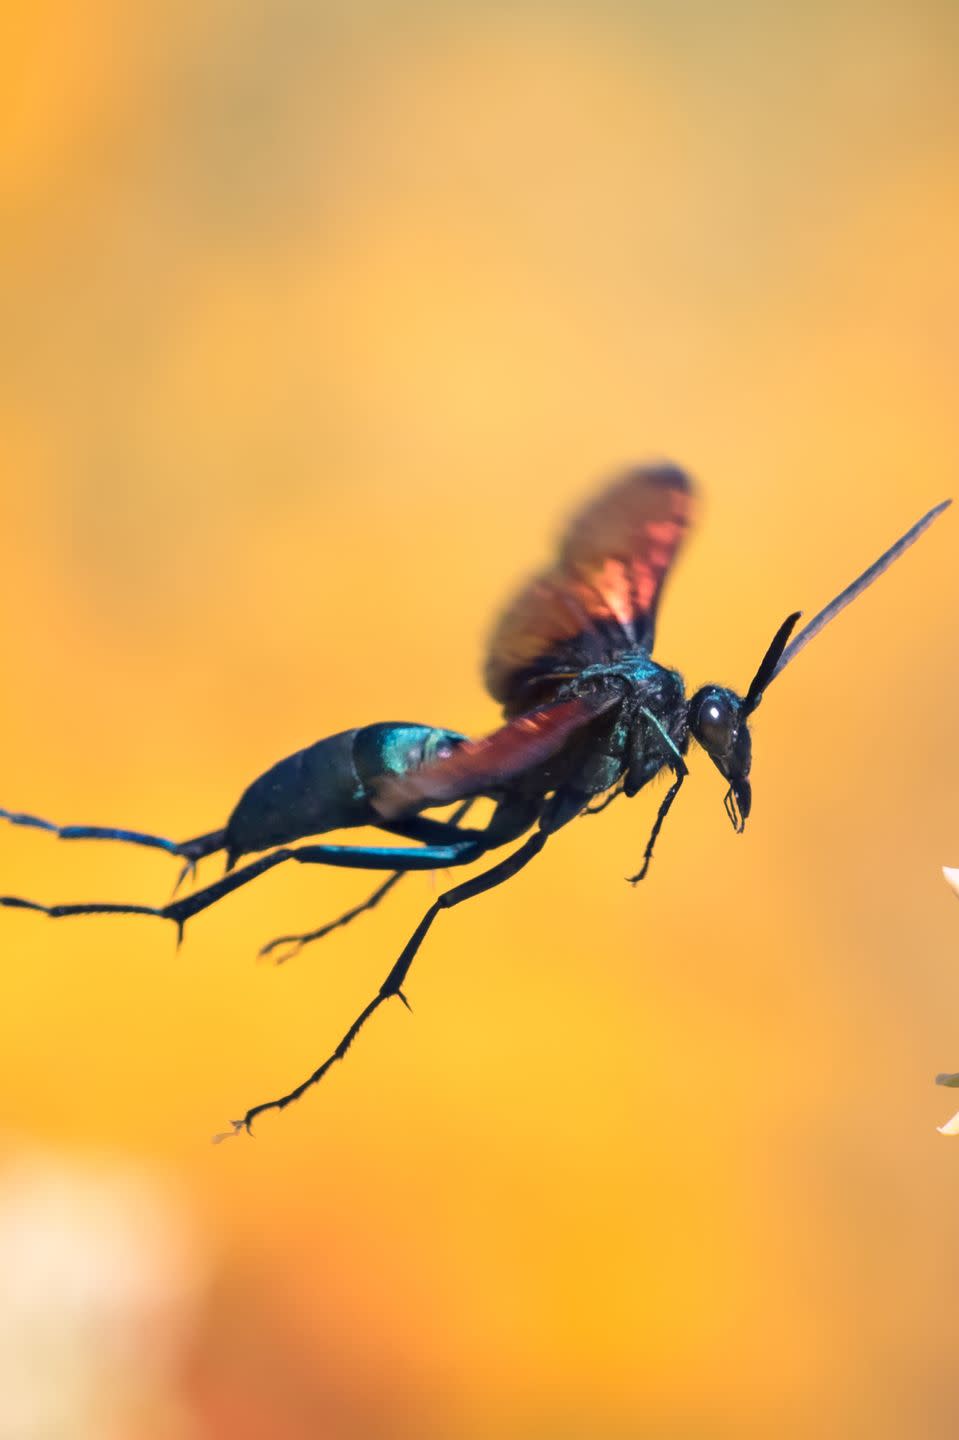 <p>Don’t let the name fool you—it’s not a spider or a bird. It’s actually a wasp. But this insect leaves one of the most painful bug bites. According to entomologist Justin Schmidt, who created the “Schmidt sting pain index” to measure the severity of bug bites, on a scale of 1 to 4, the tarantula hawk is one of just two insects that scores a 4.</p>